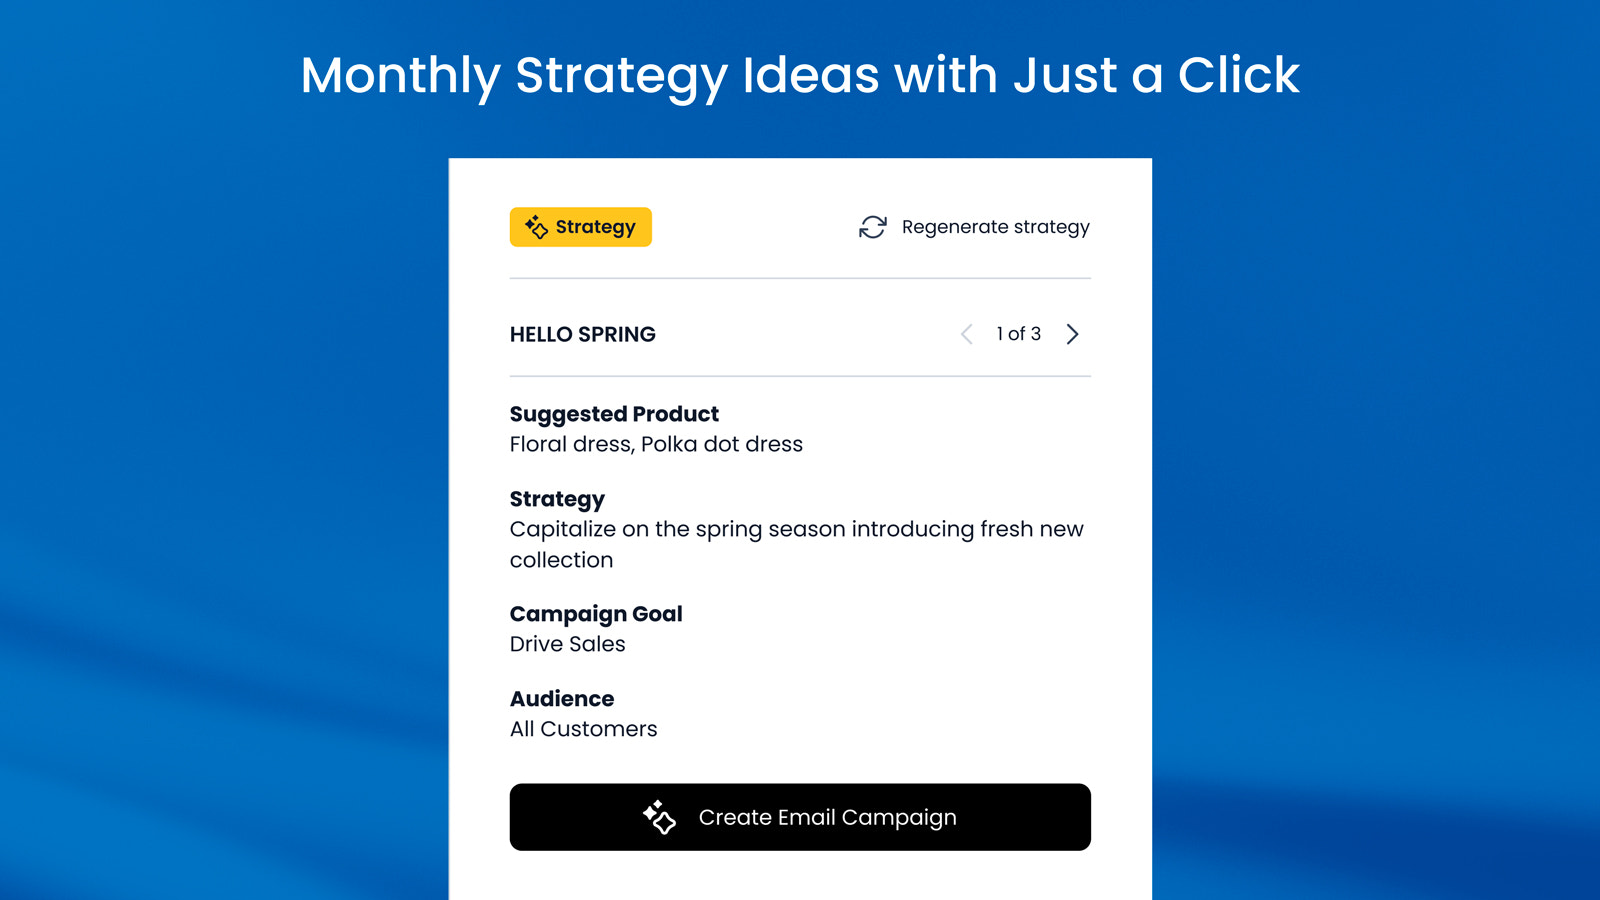 Effortlessly generate campaign strategies across the month